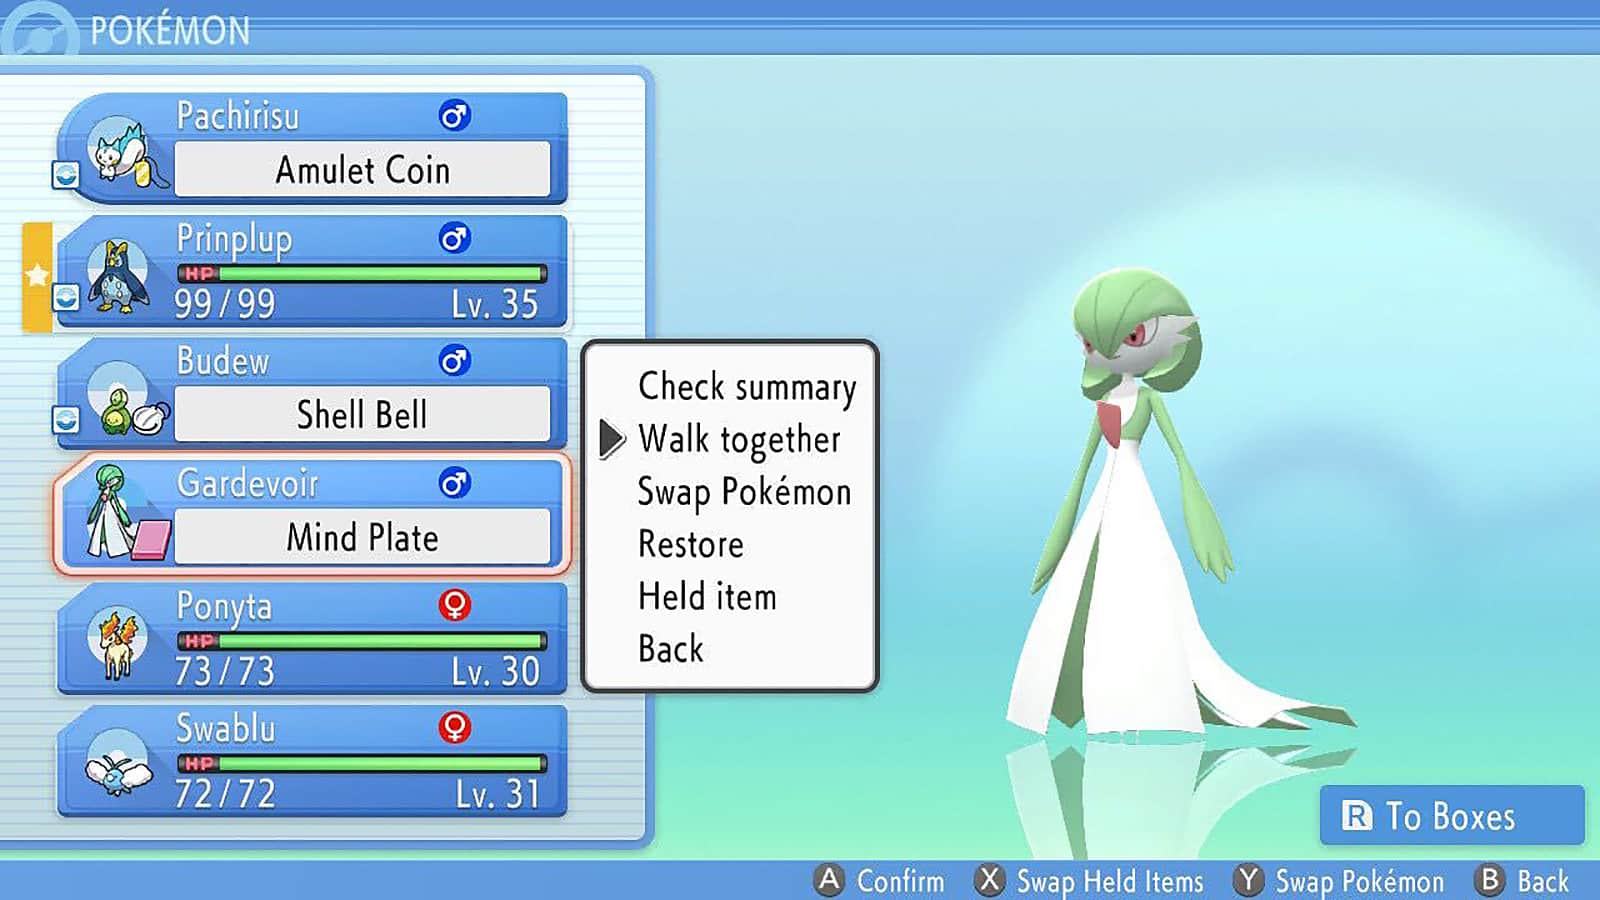 An image of Gardevoir with the 'Walk Together' option in Pokemon Brilliant Diamond & Shining Pearl